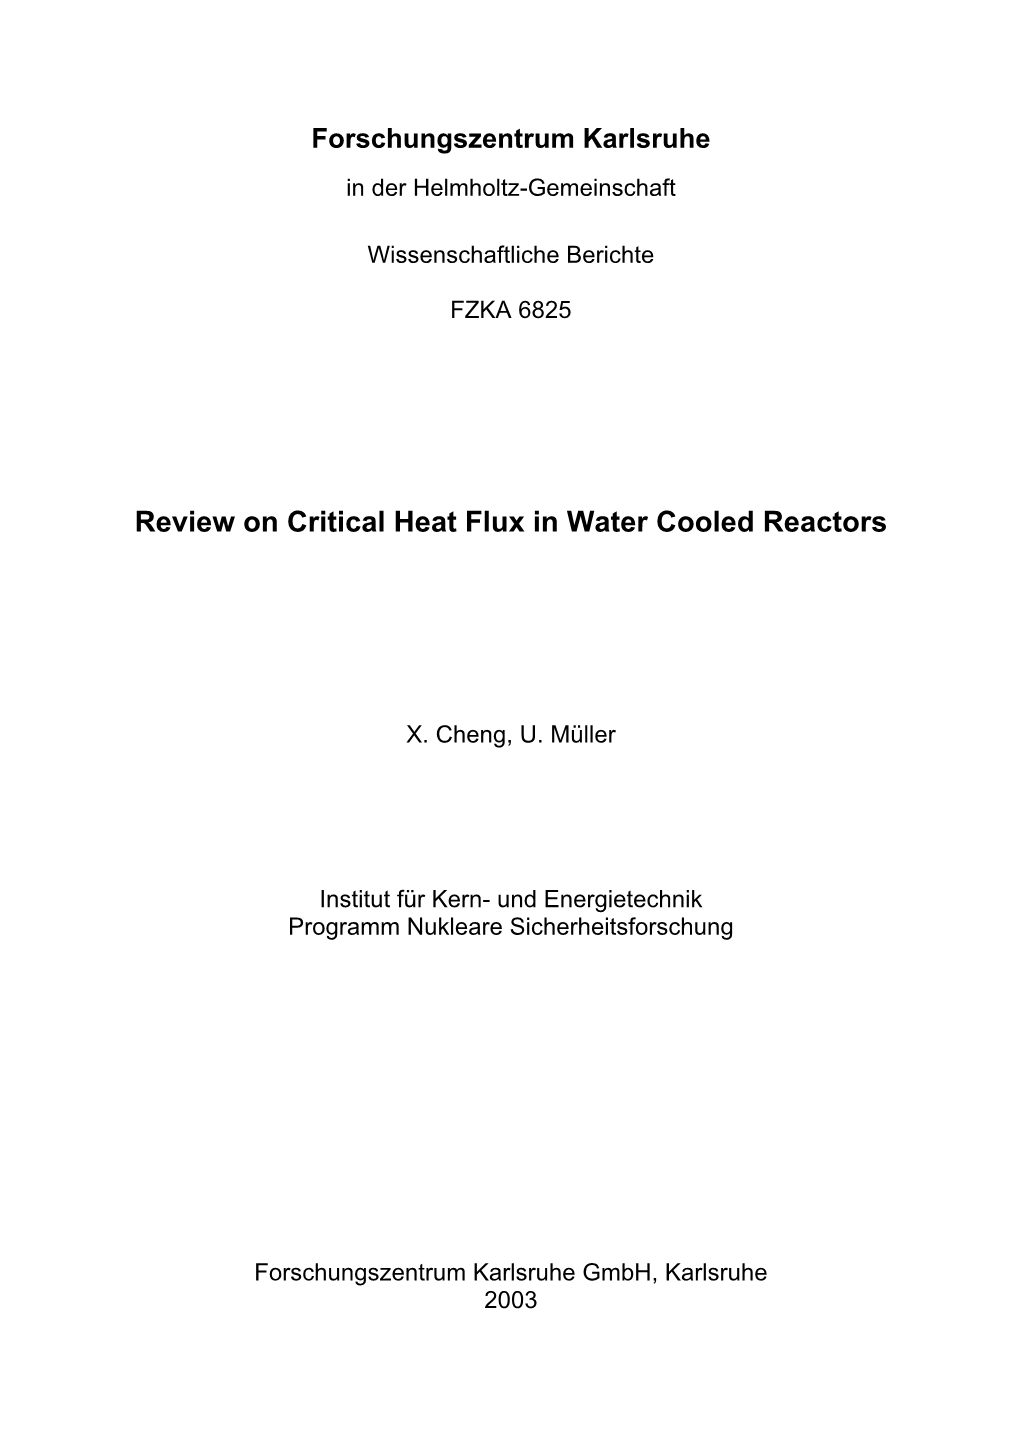 Review on Critical Heat Flux in Water Cooled Reactors